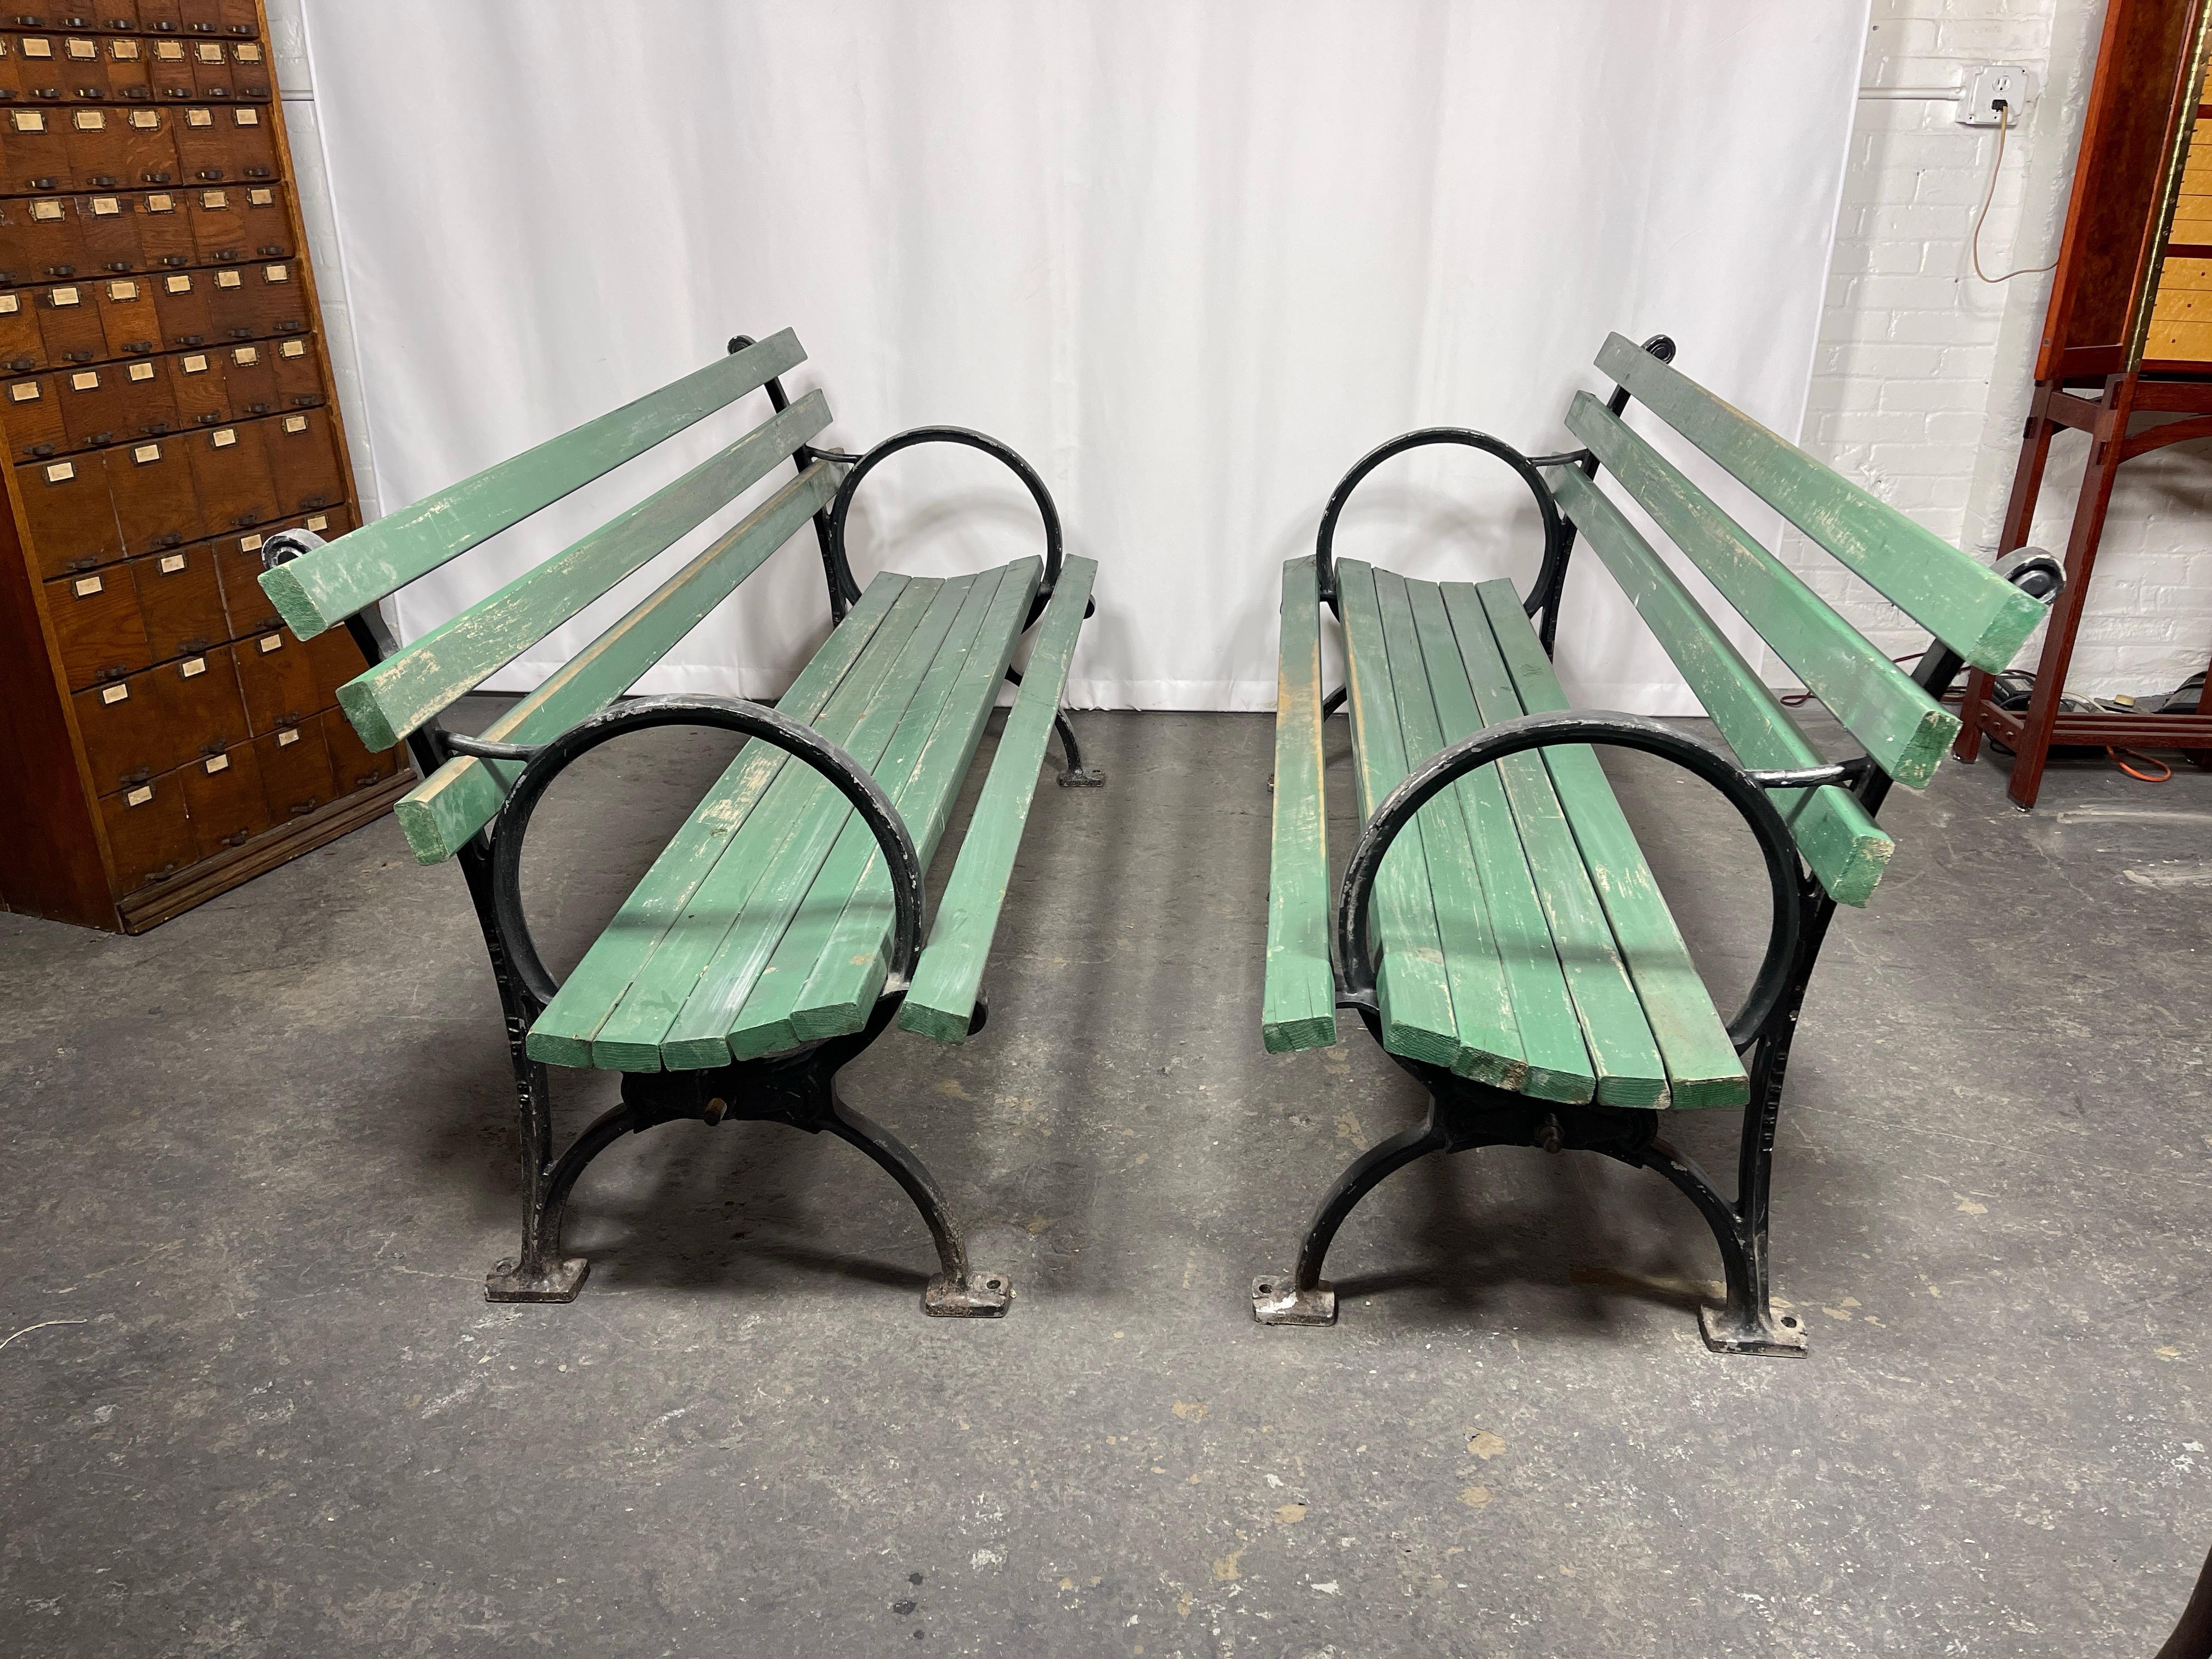 Classic Art Deco Style Garden Bench, 1939 Worlds Fair / Centrial Park / N.Y.C. In Good Condition For Sale In Buffalo, NY